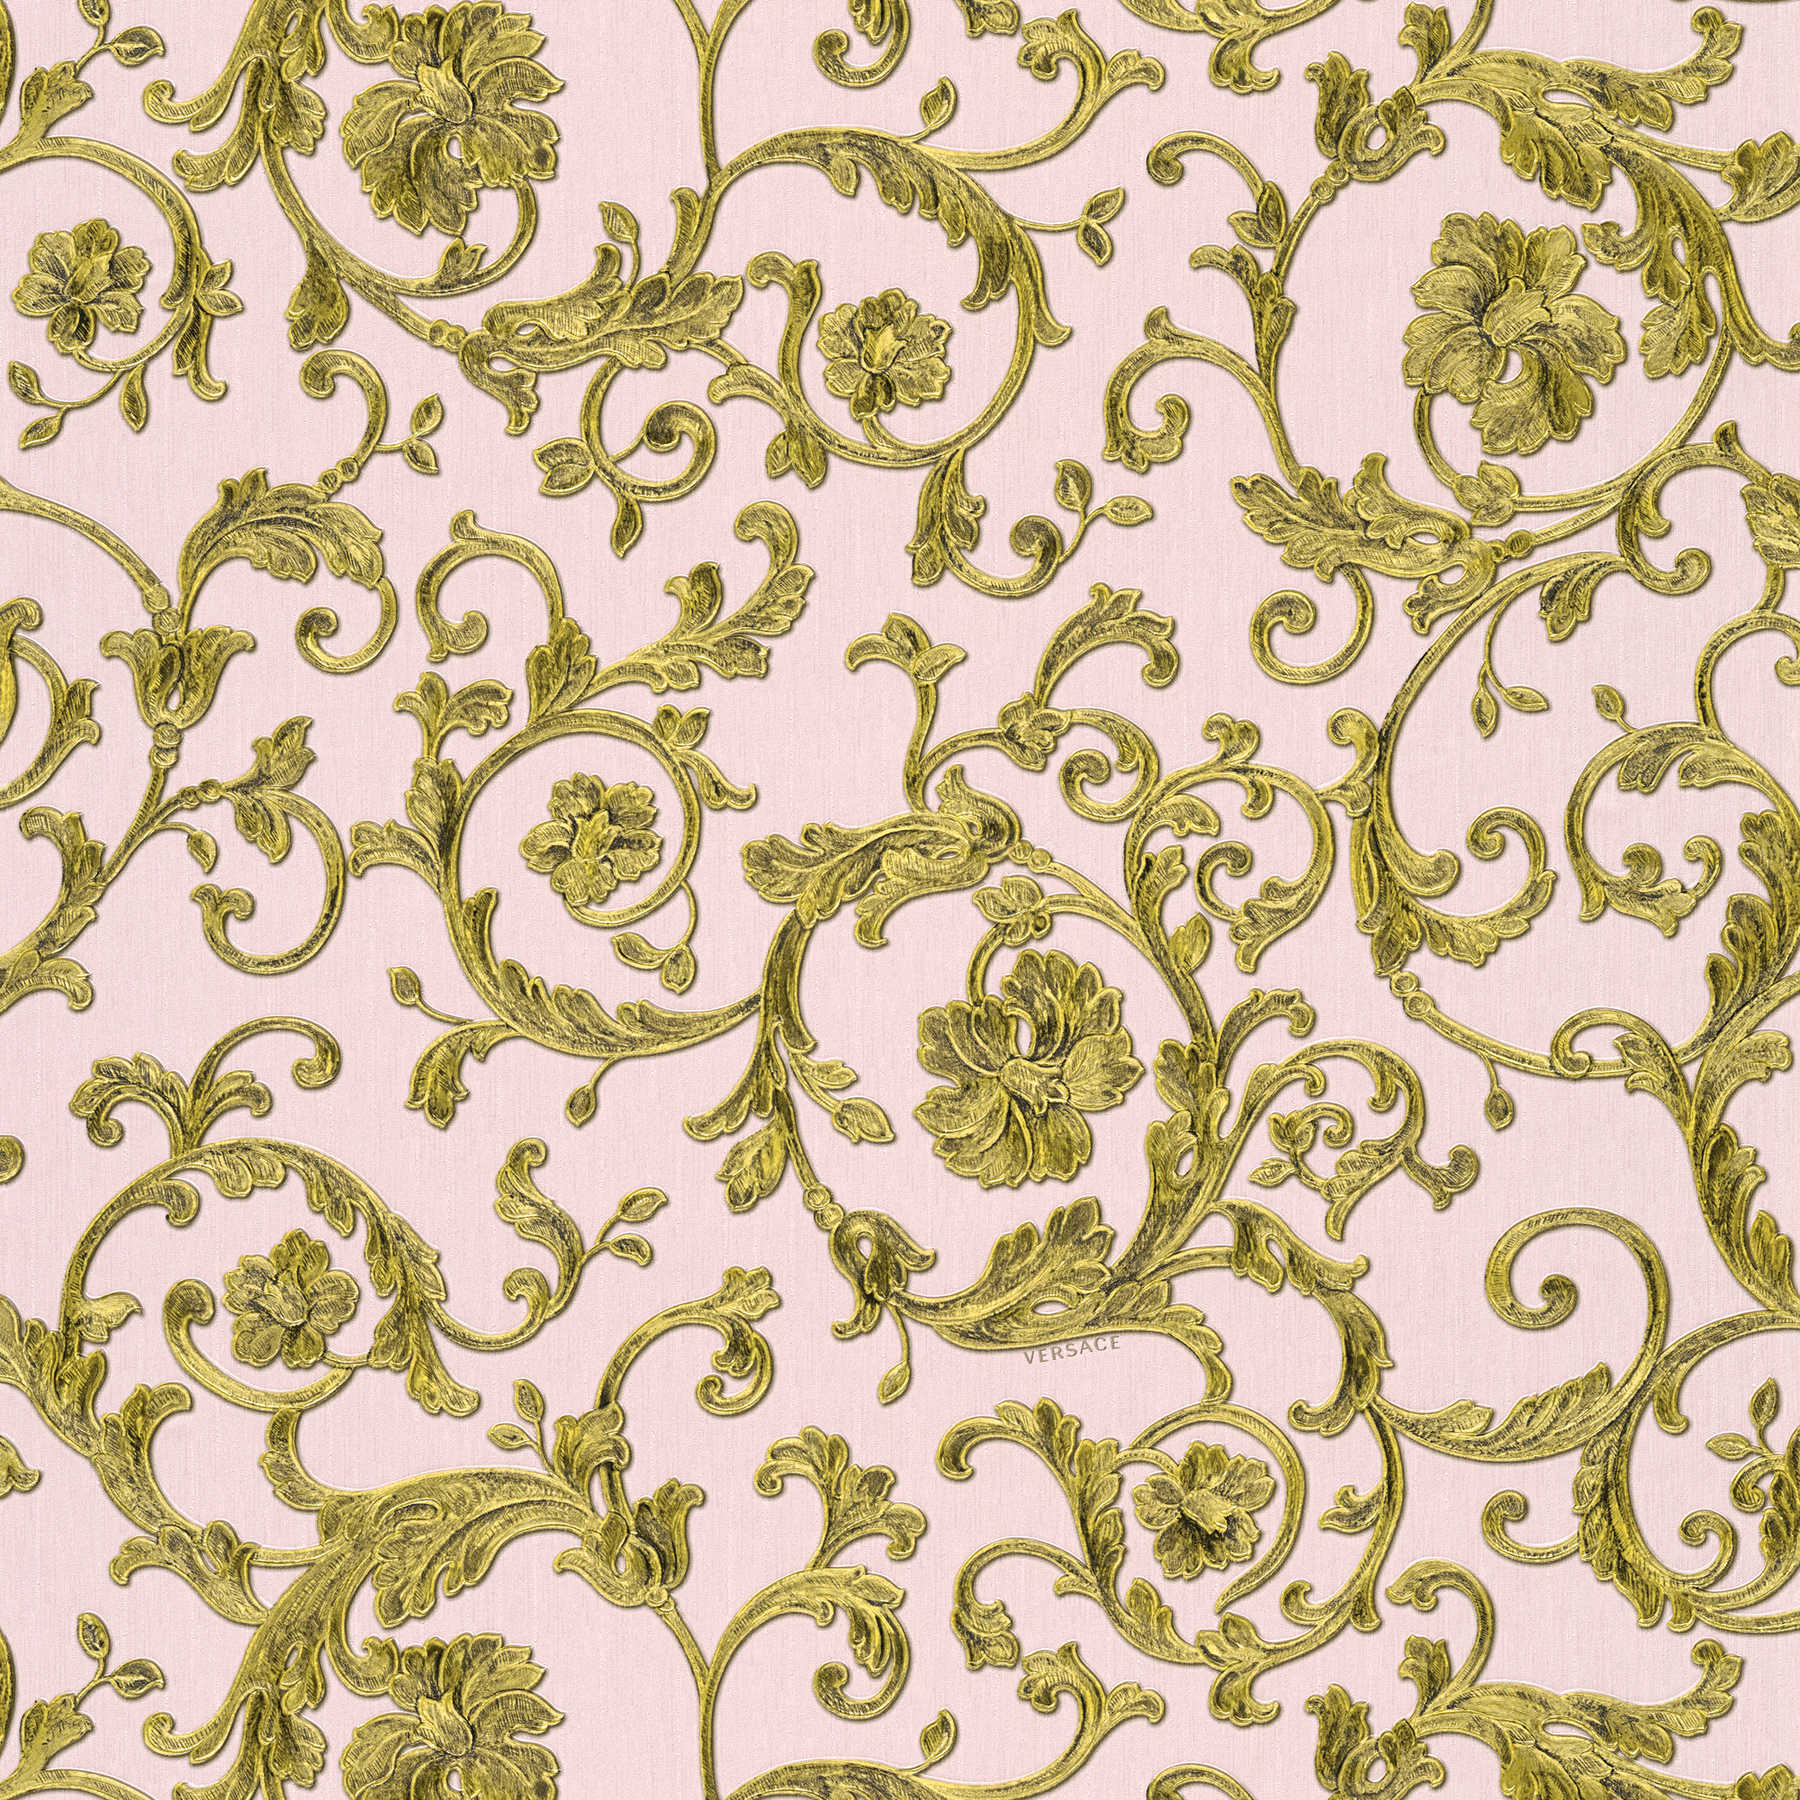 VERSACE wallpaper old gold ornaments floral - pink
